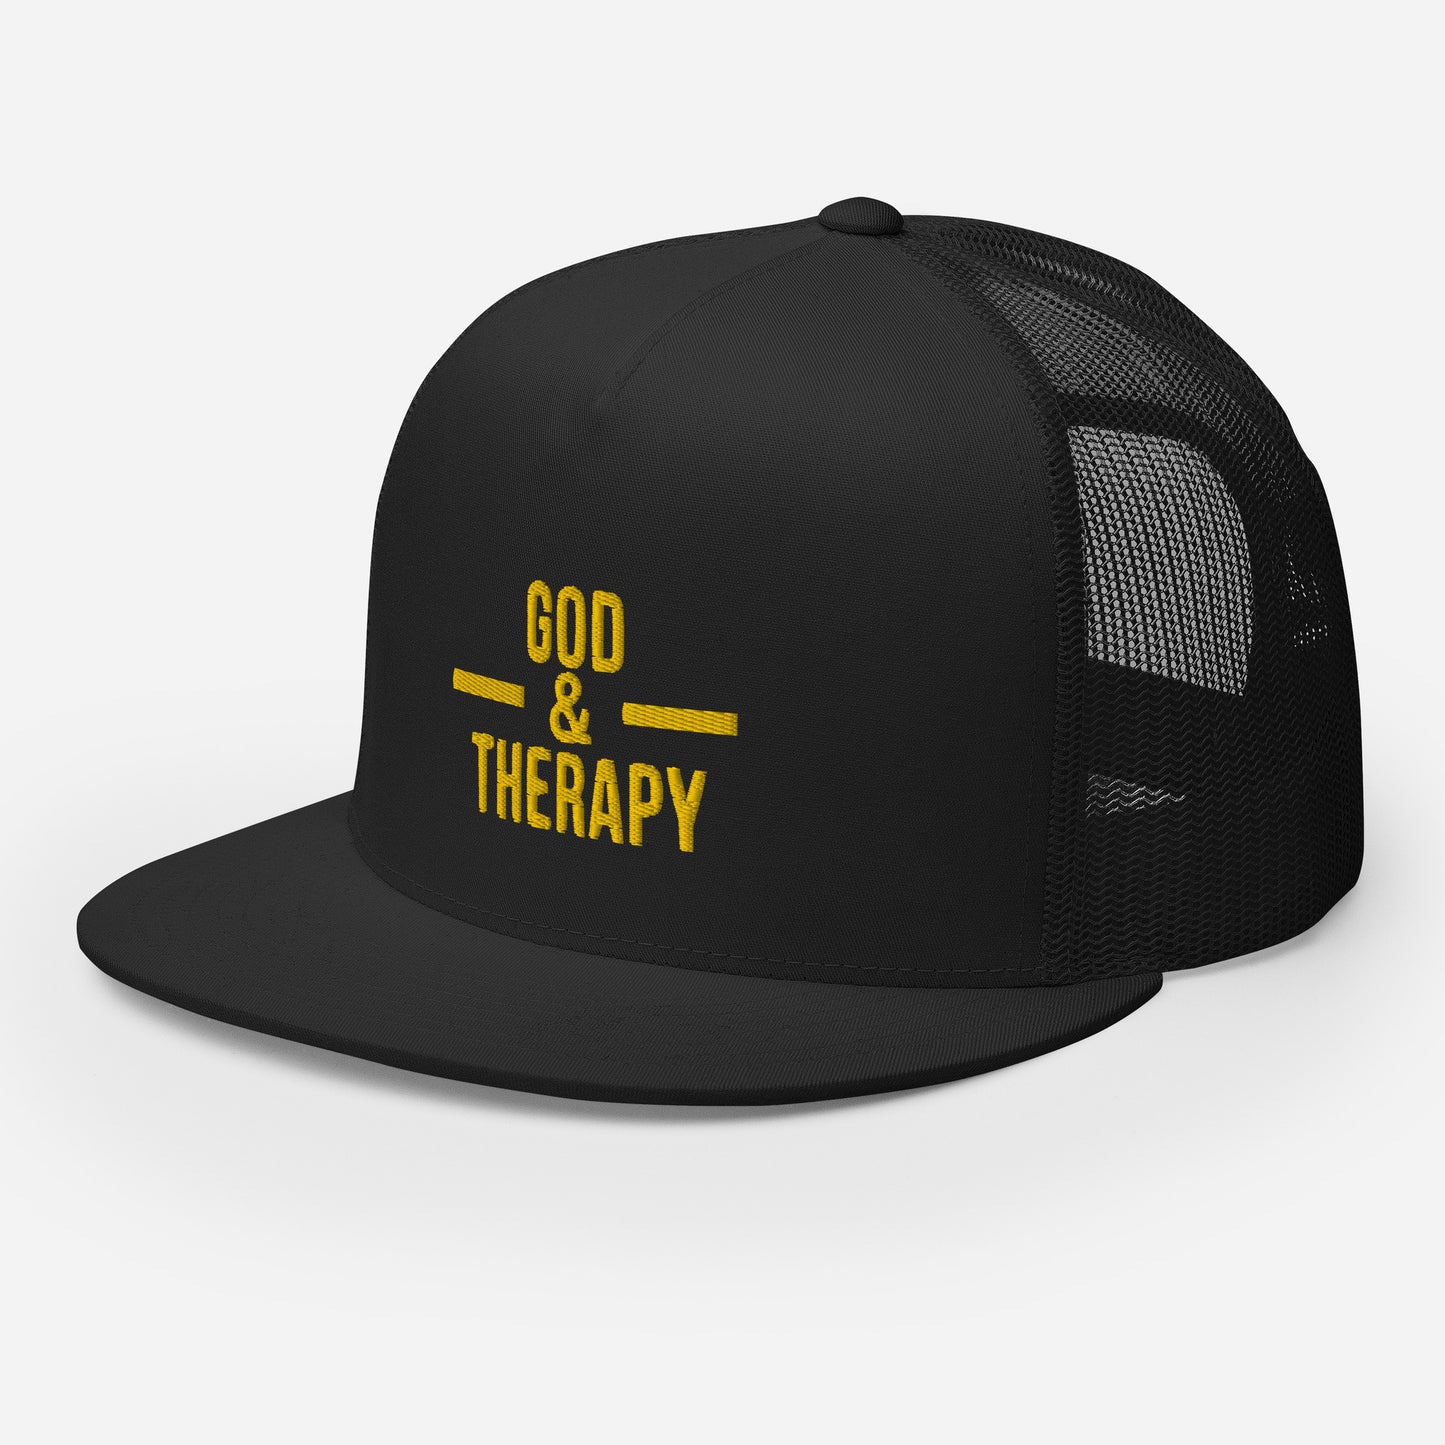 God and Therapy "Trucker Cap"